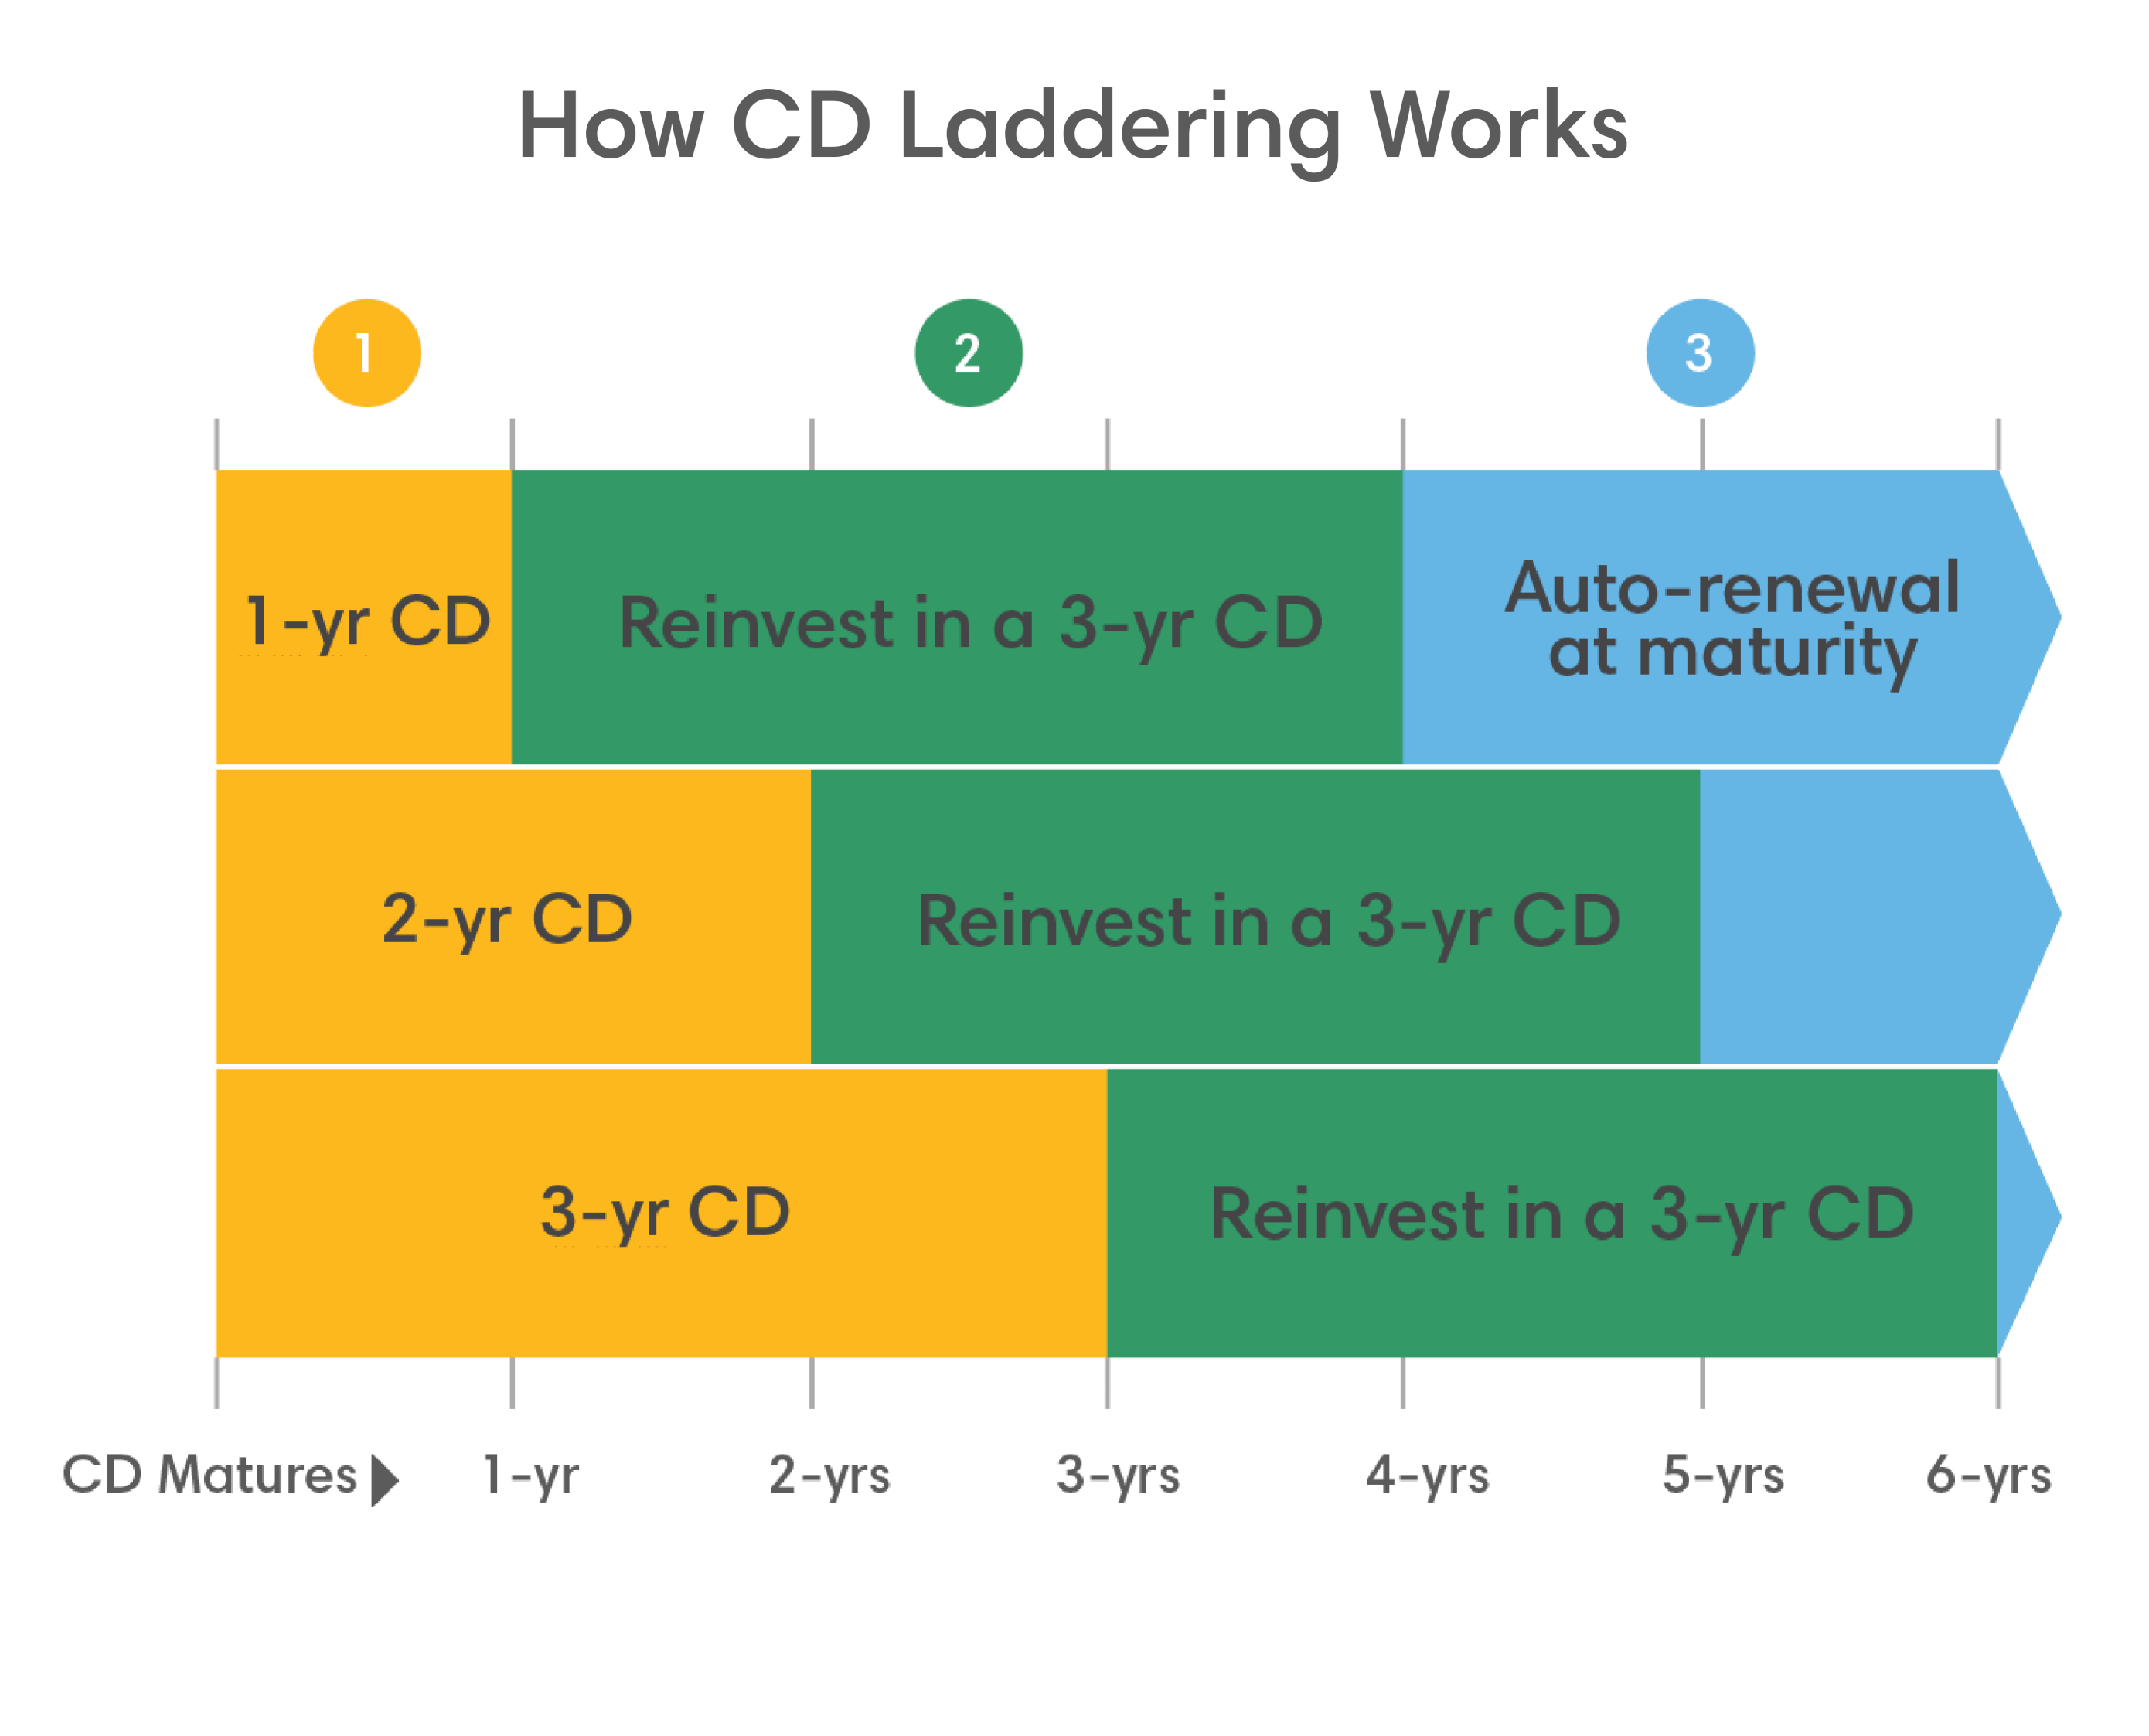 Graph chart for how CD laddering works. A CD that matures after 1 year can be reinvested in a 3-year CD with auto-renewal at maturity. You can do the same with CDs that mature after 2 years and 3 years.